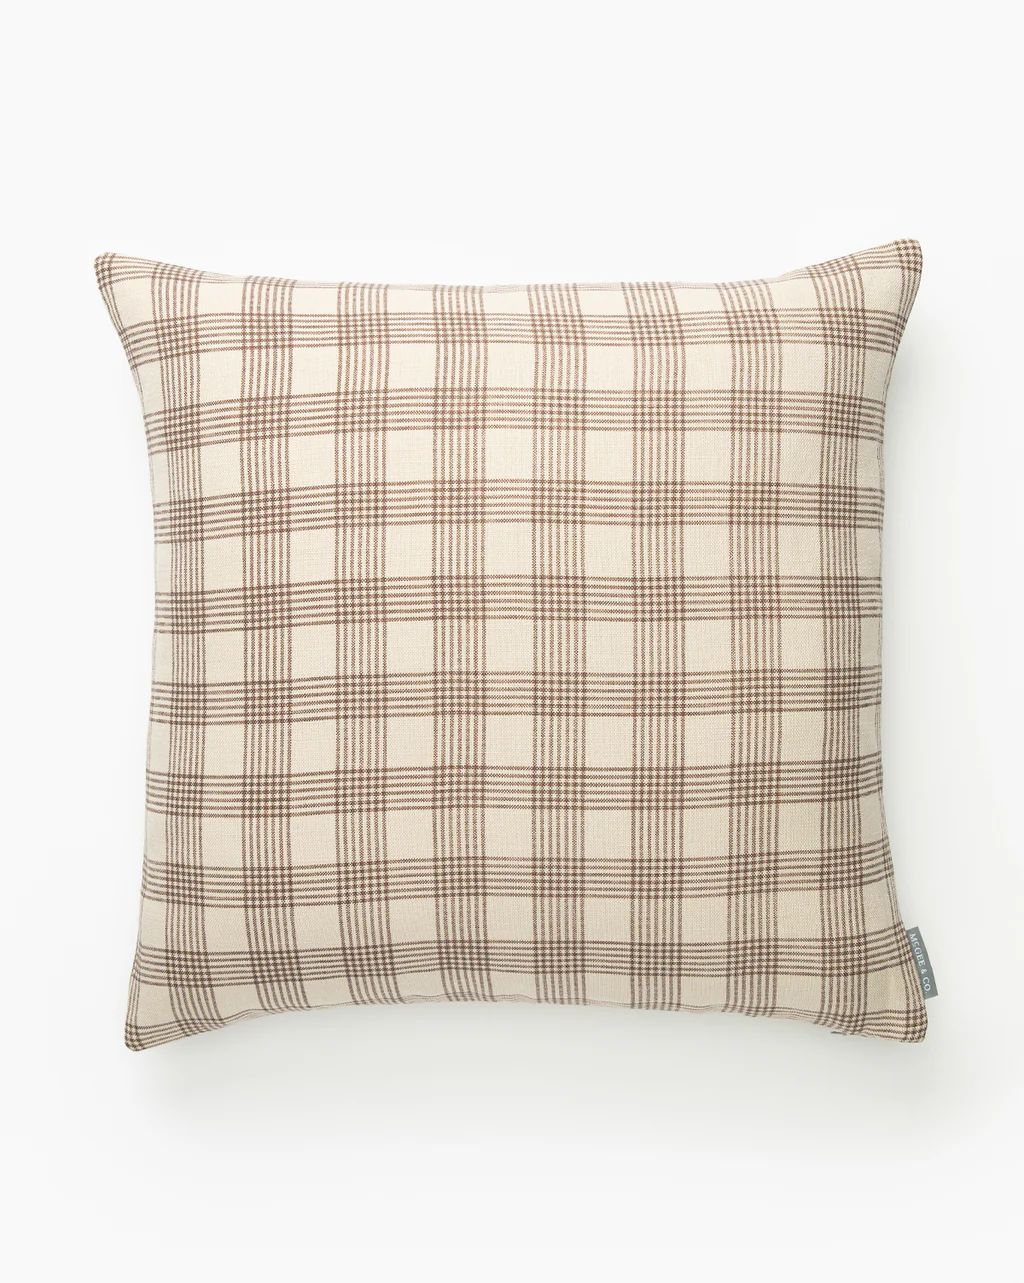 Glendale Pillow Cover | McGee & Co. (US)